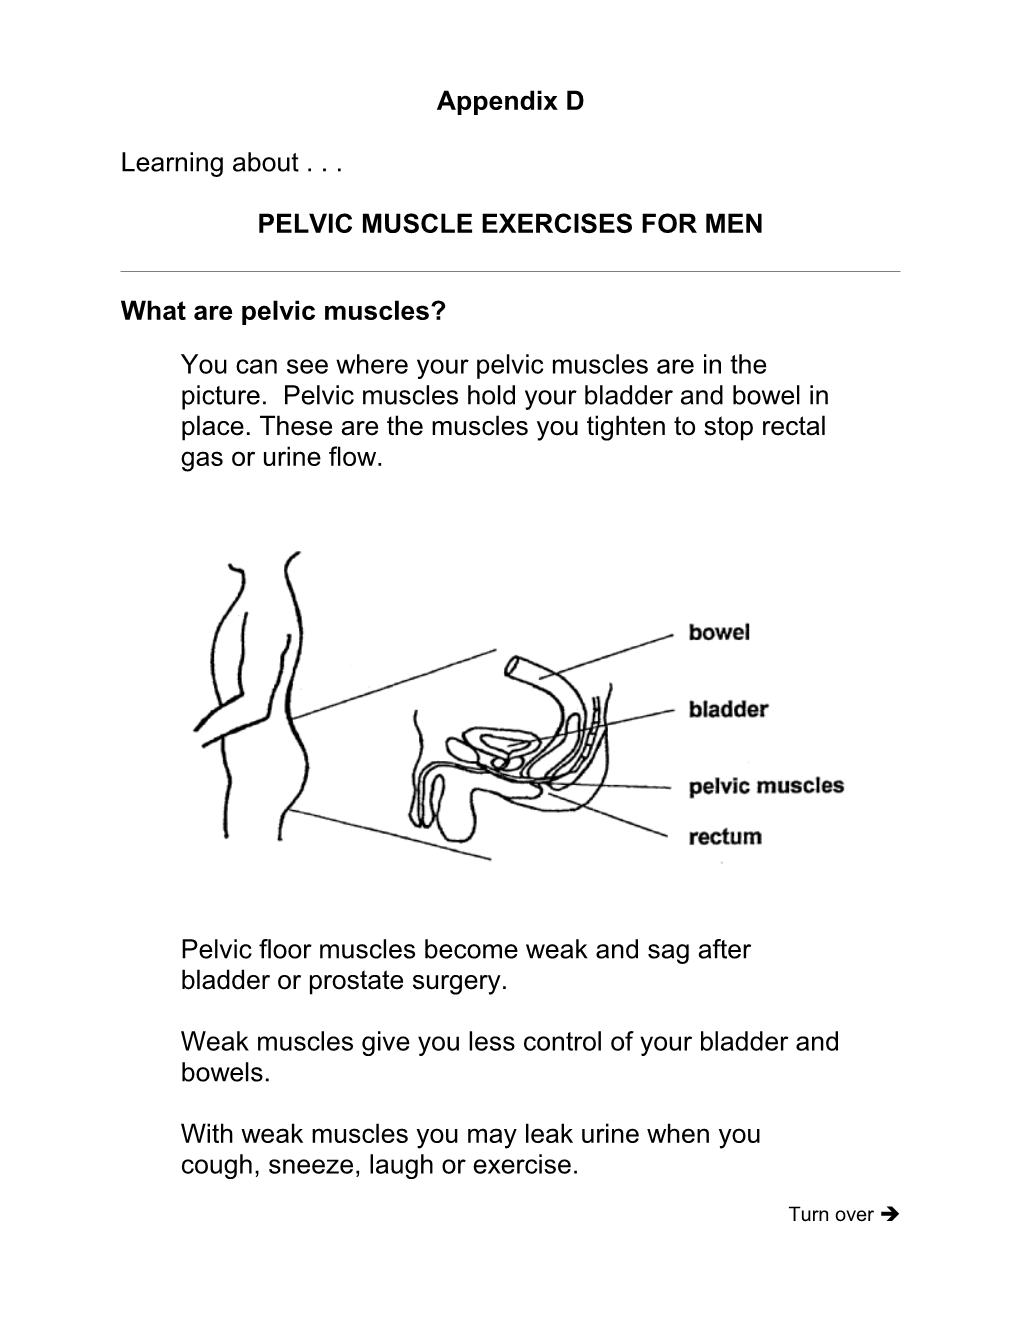 Pelvic Muscle Exercises for Men